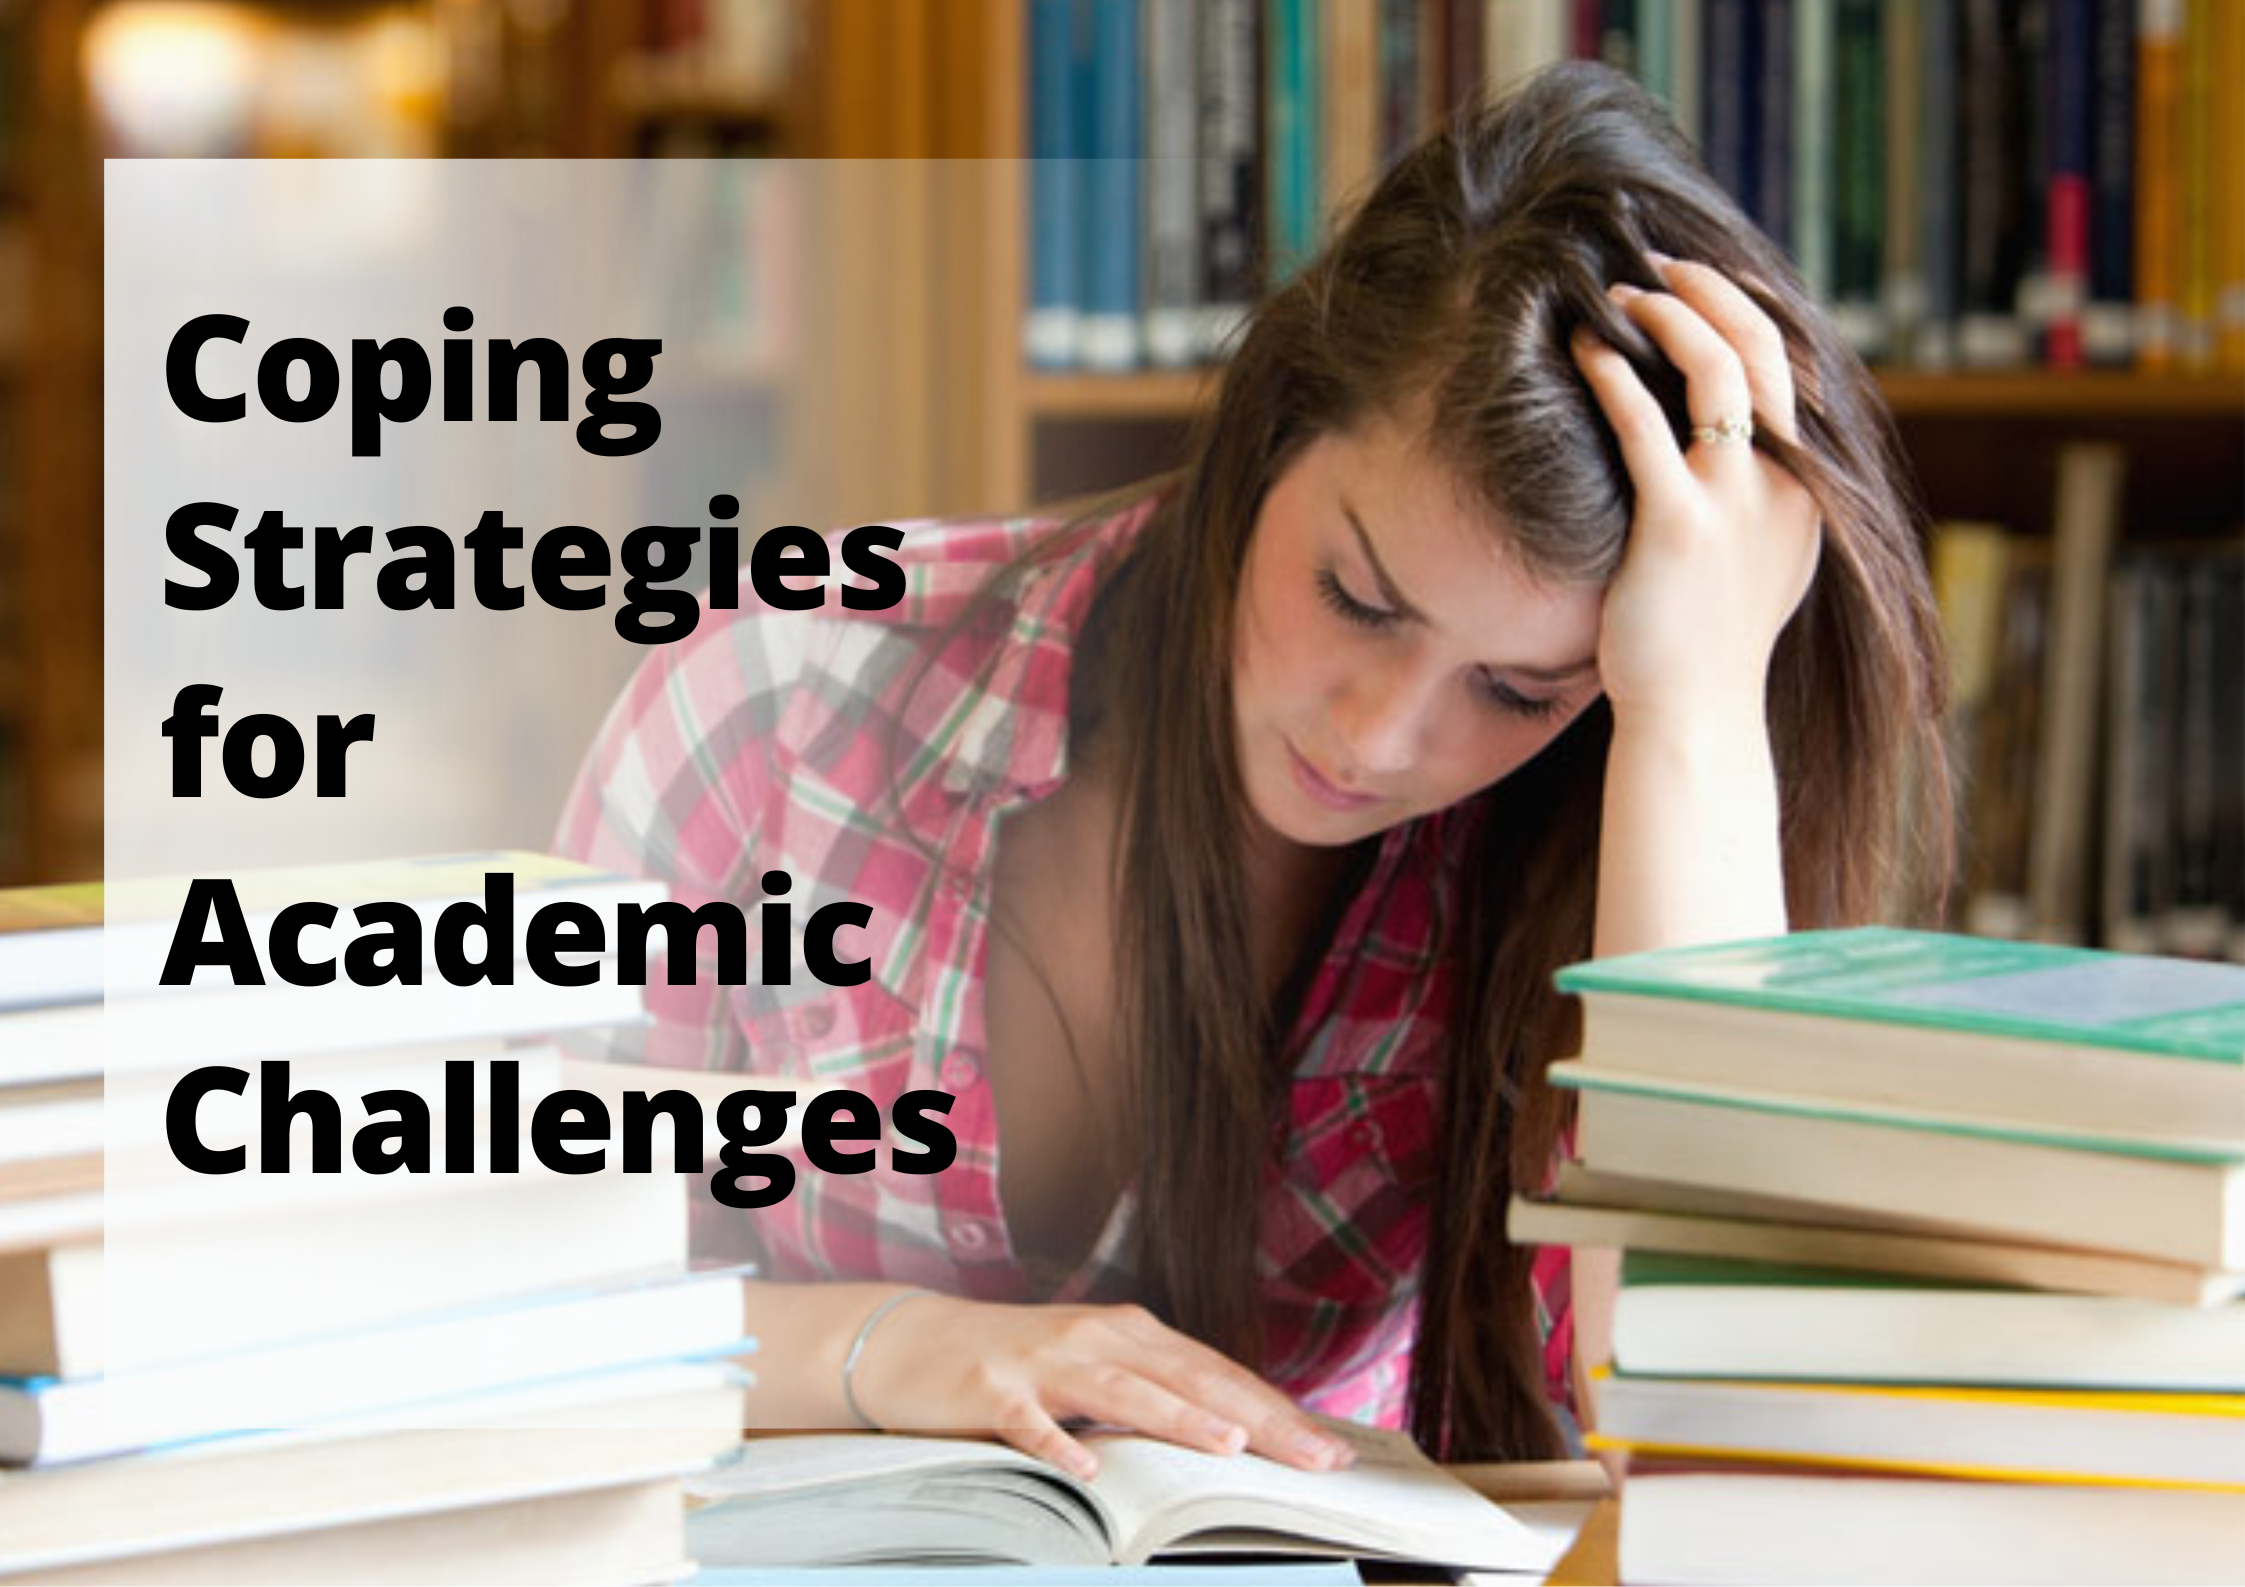 You are currently viewing Building Resilience: Coping Strategies for Academic Challenges